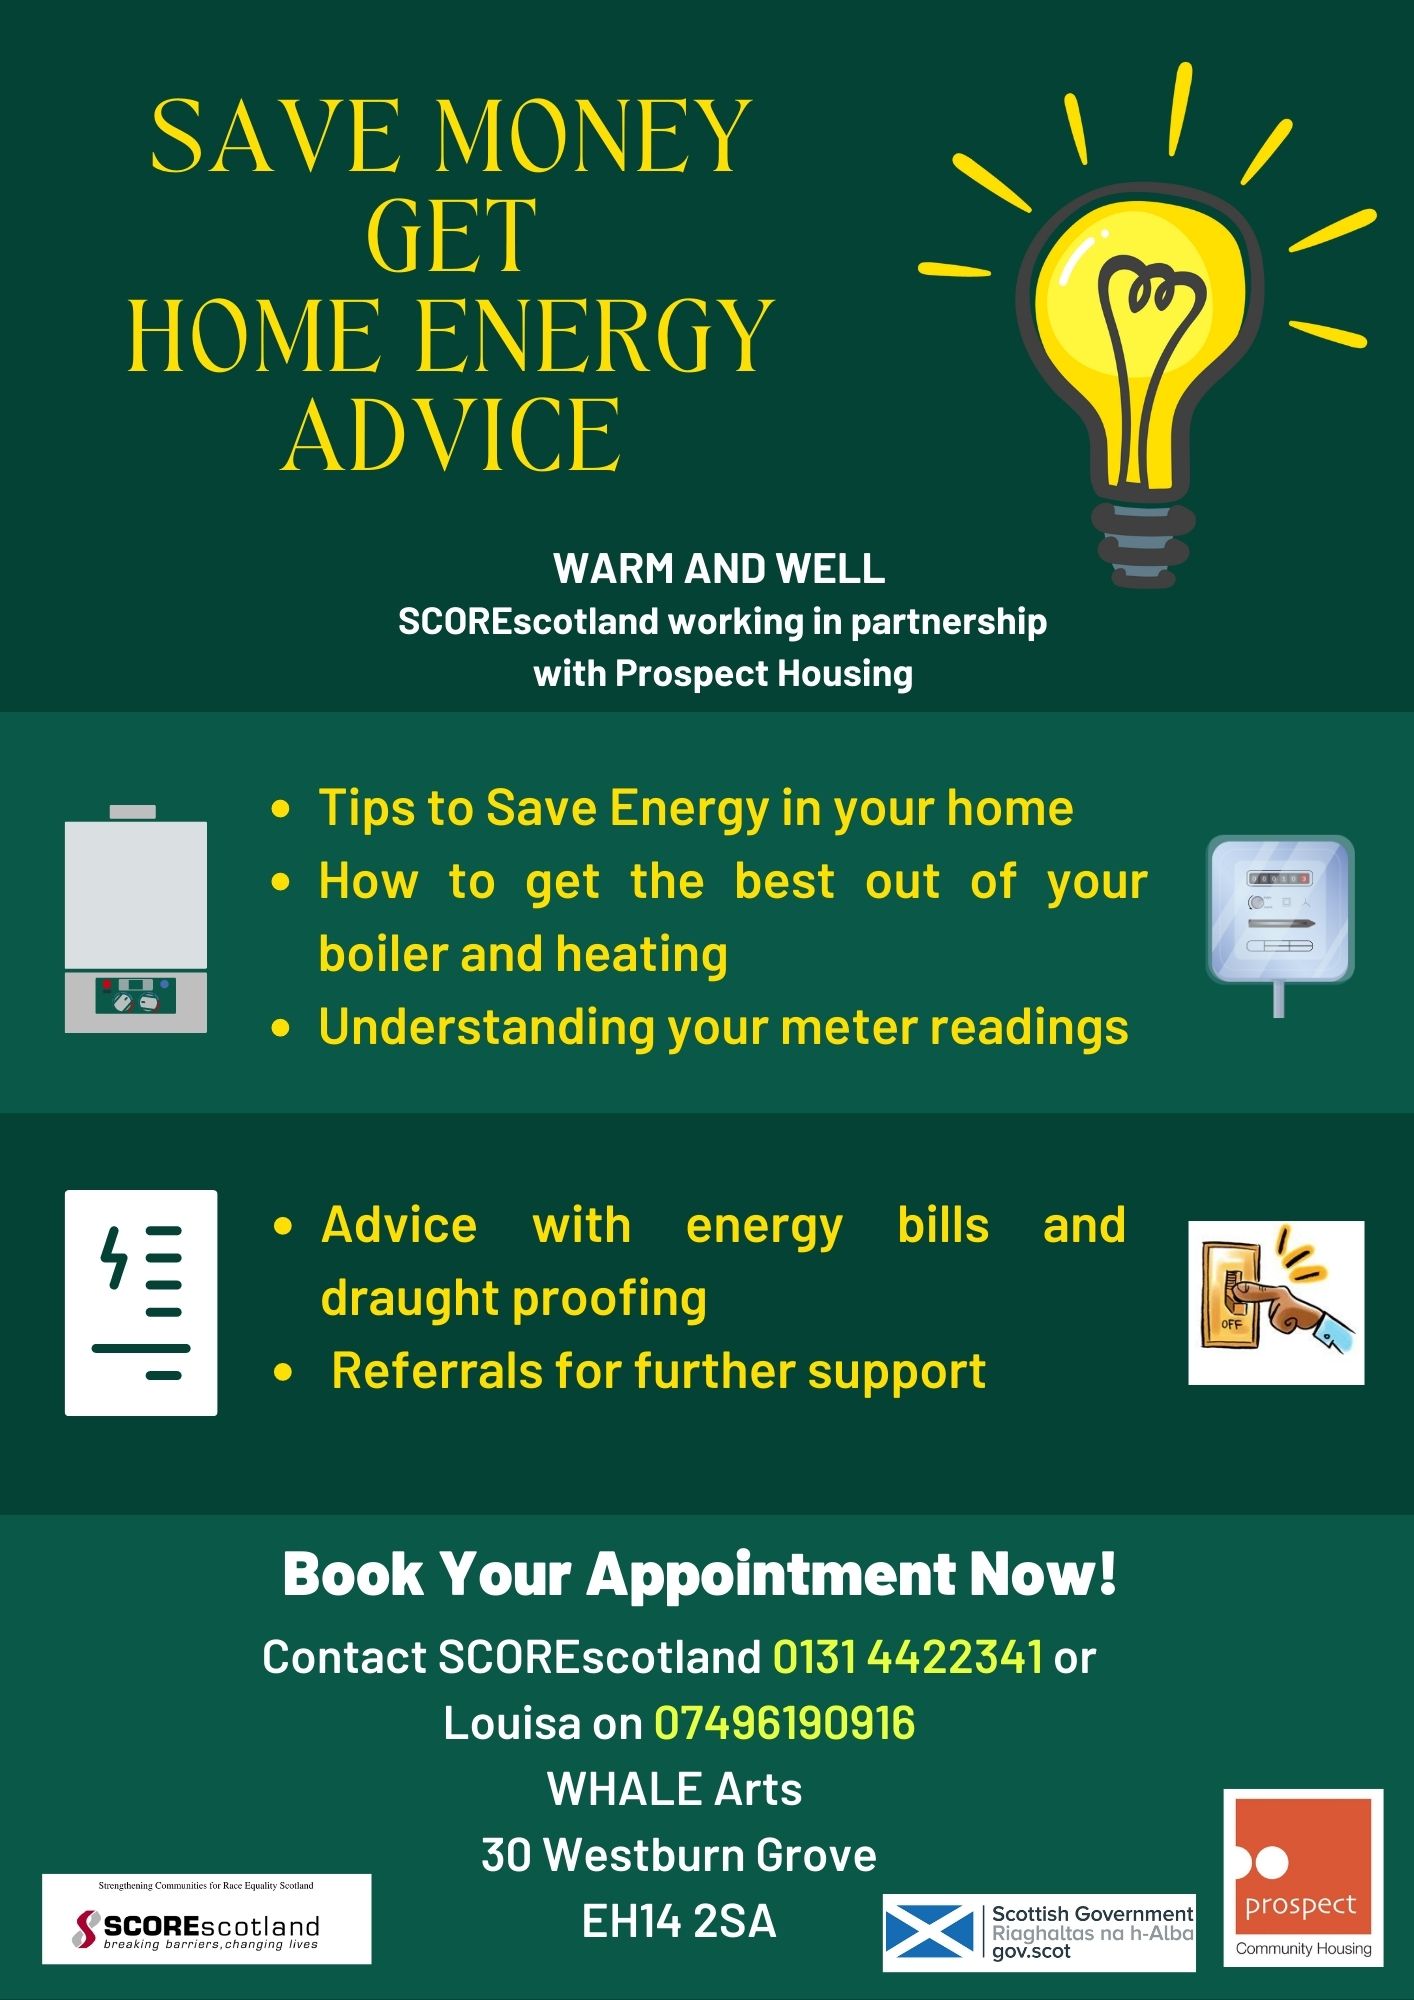 Home Energy Advice sessions